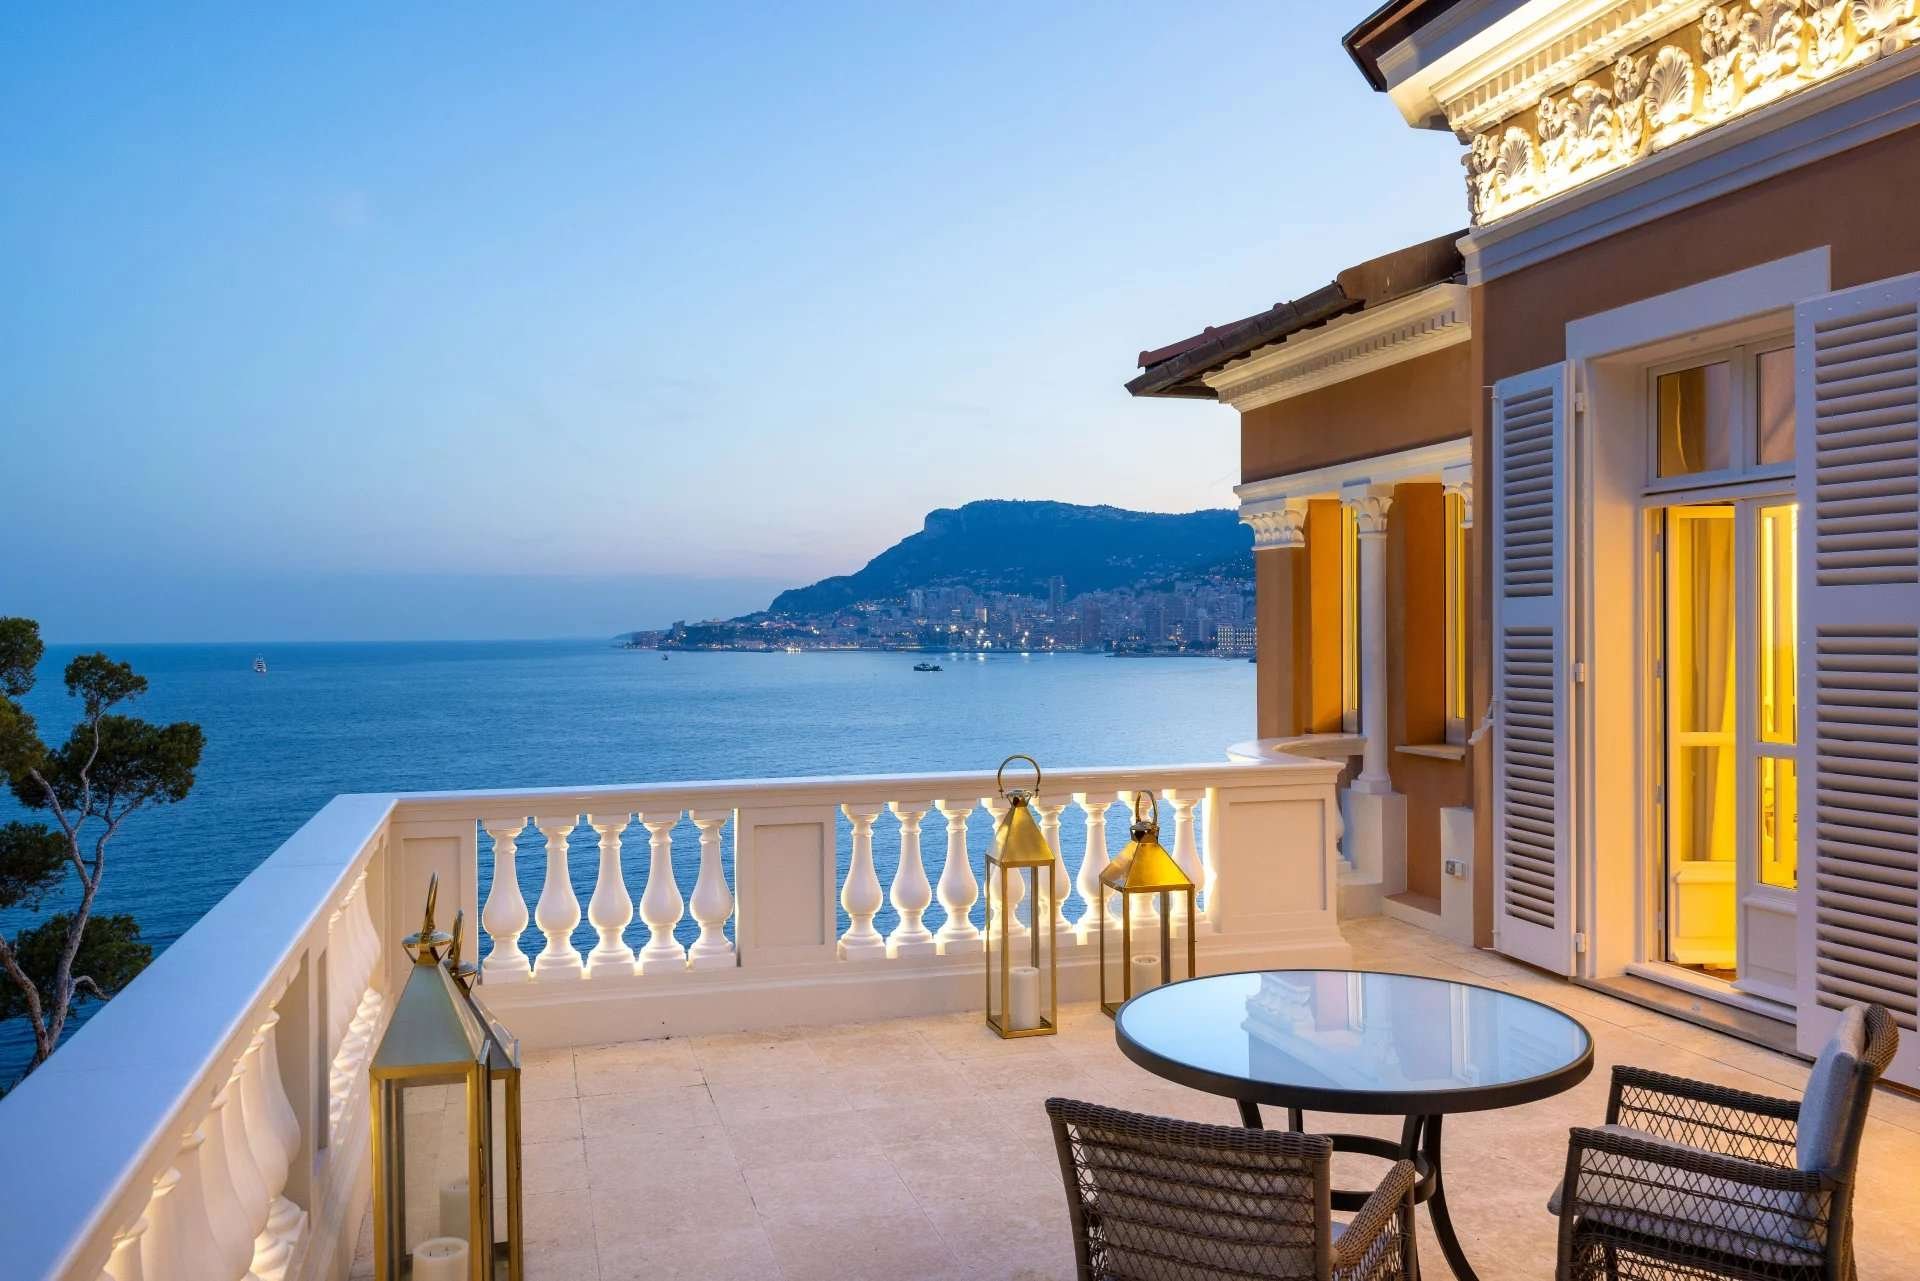 Francis York Belle Epoque Villa on The French Riviera With Views Over Monaco 13.jpg